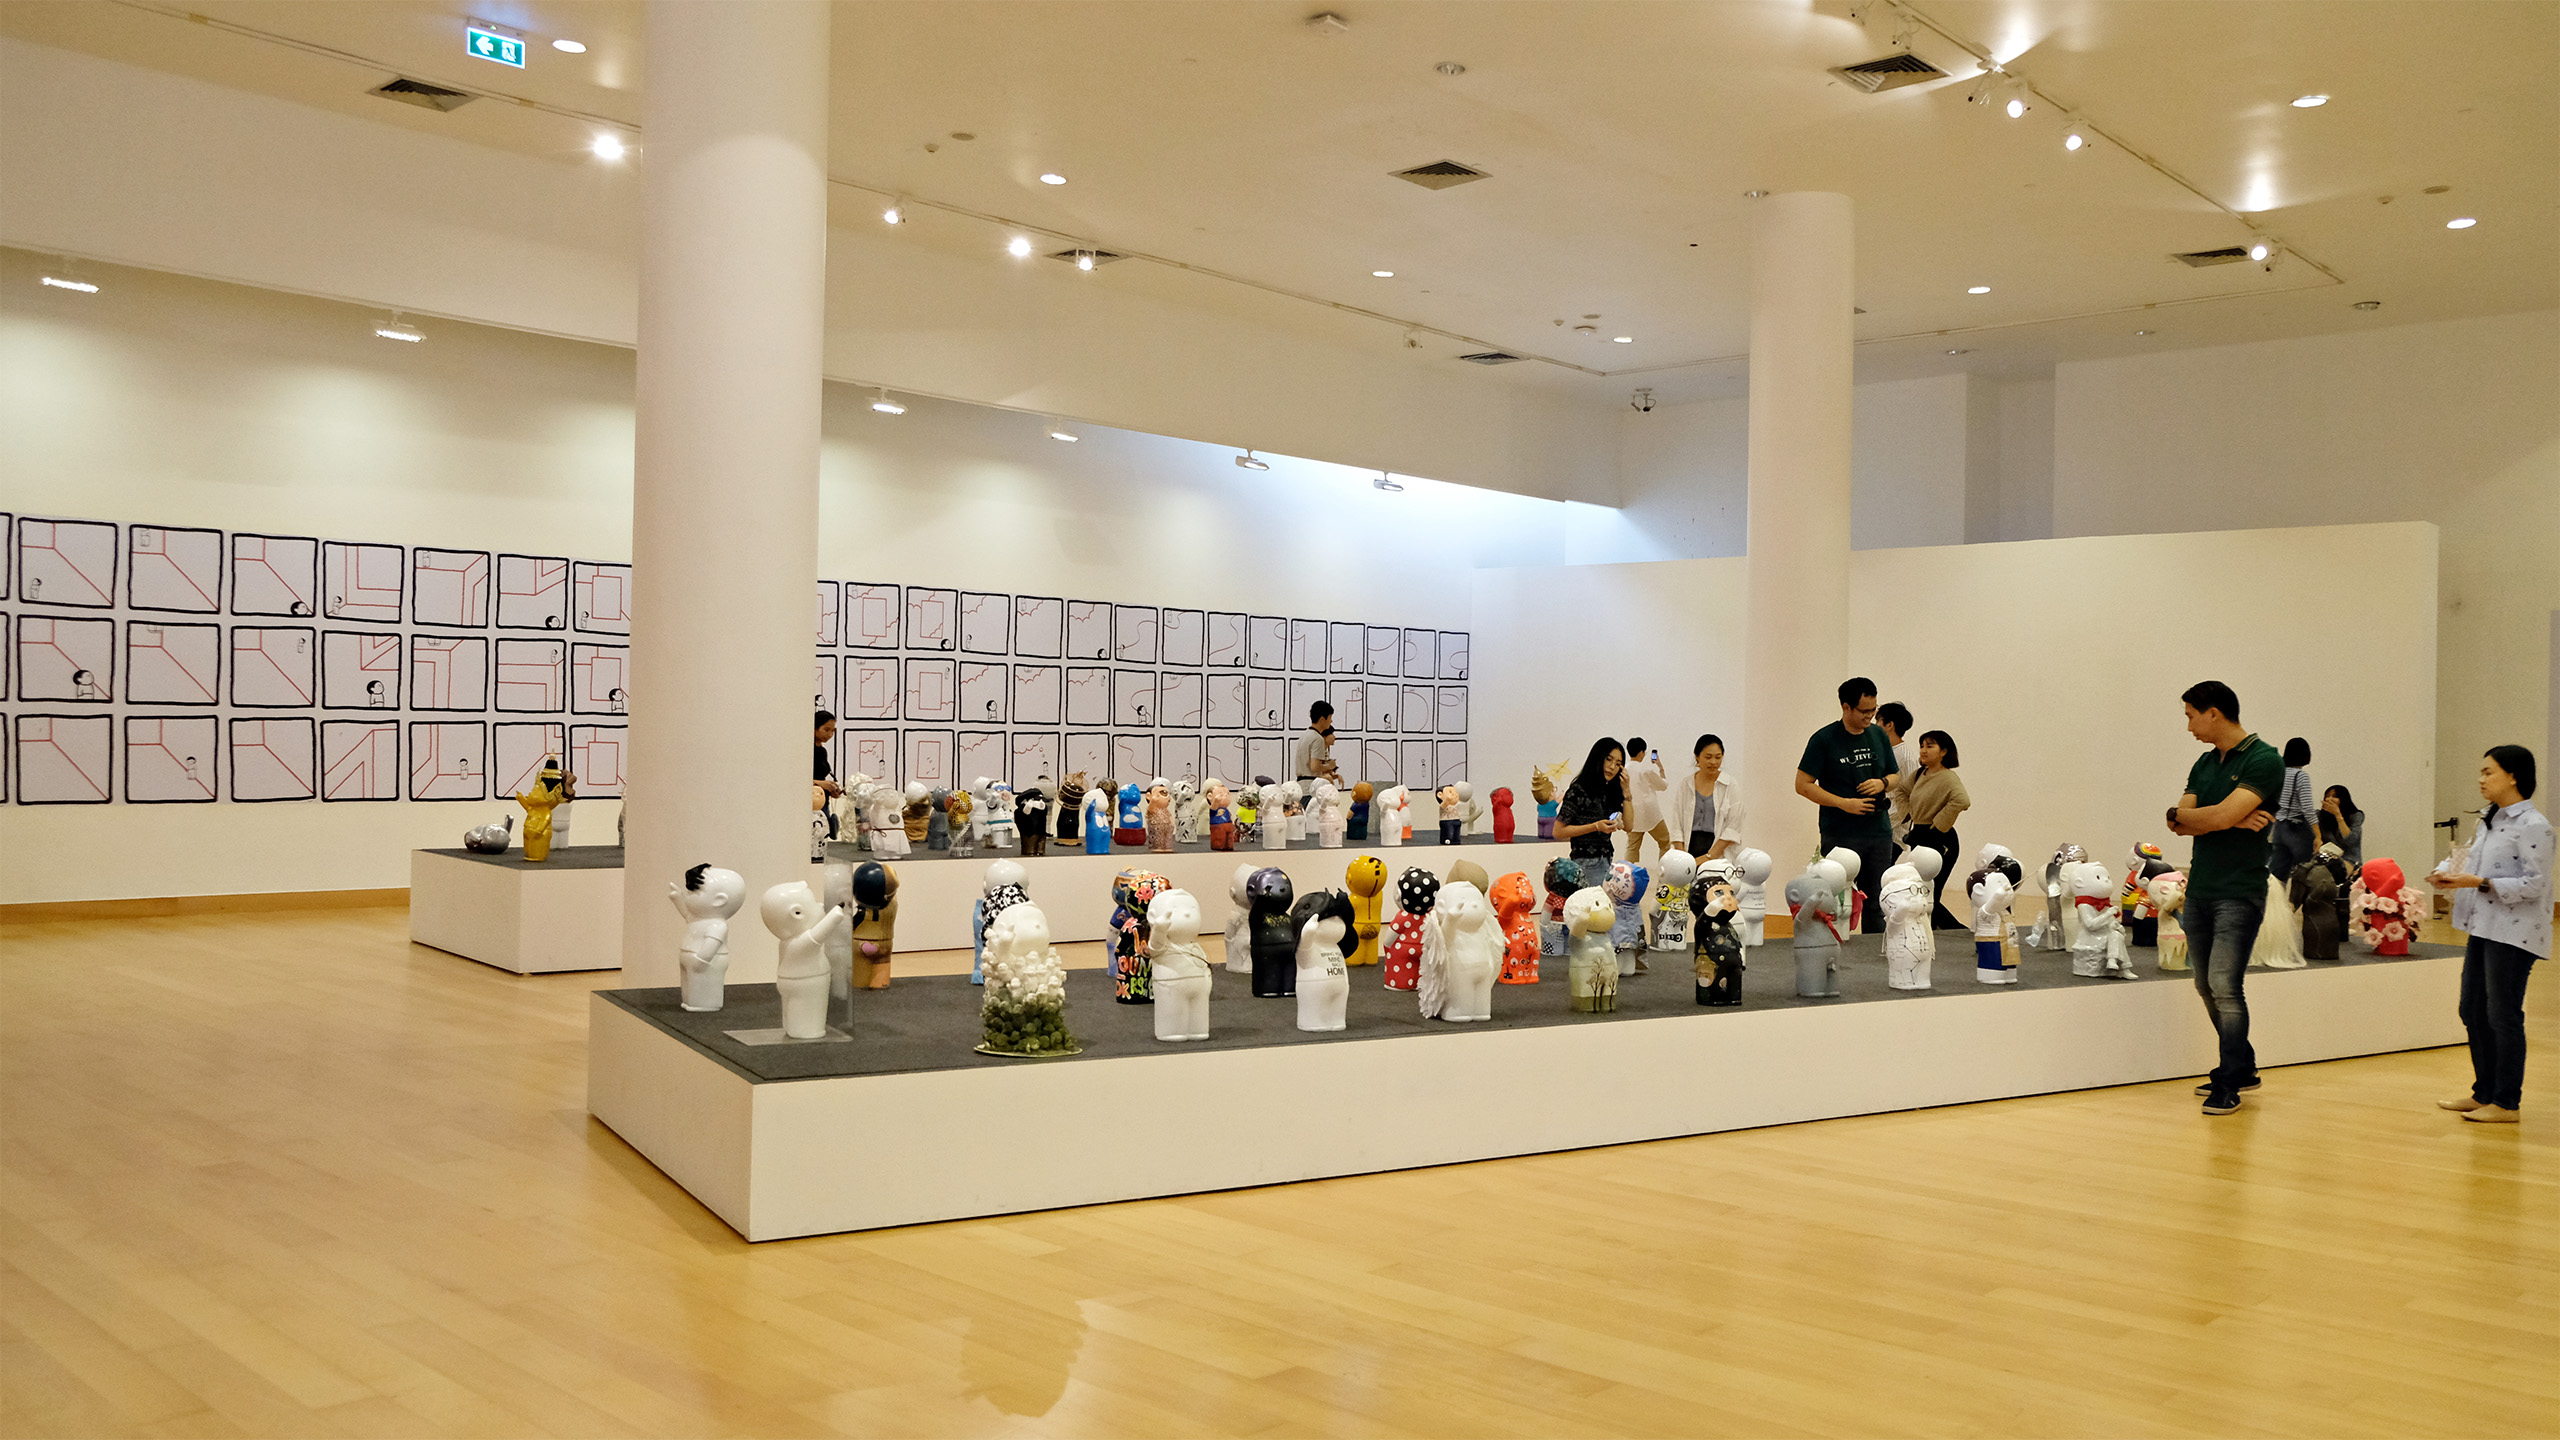 TIAN TIAN XIANG SHANG Arts is Learning Learning is Arts Exhibtion